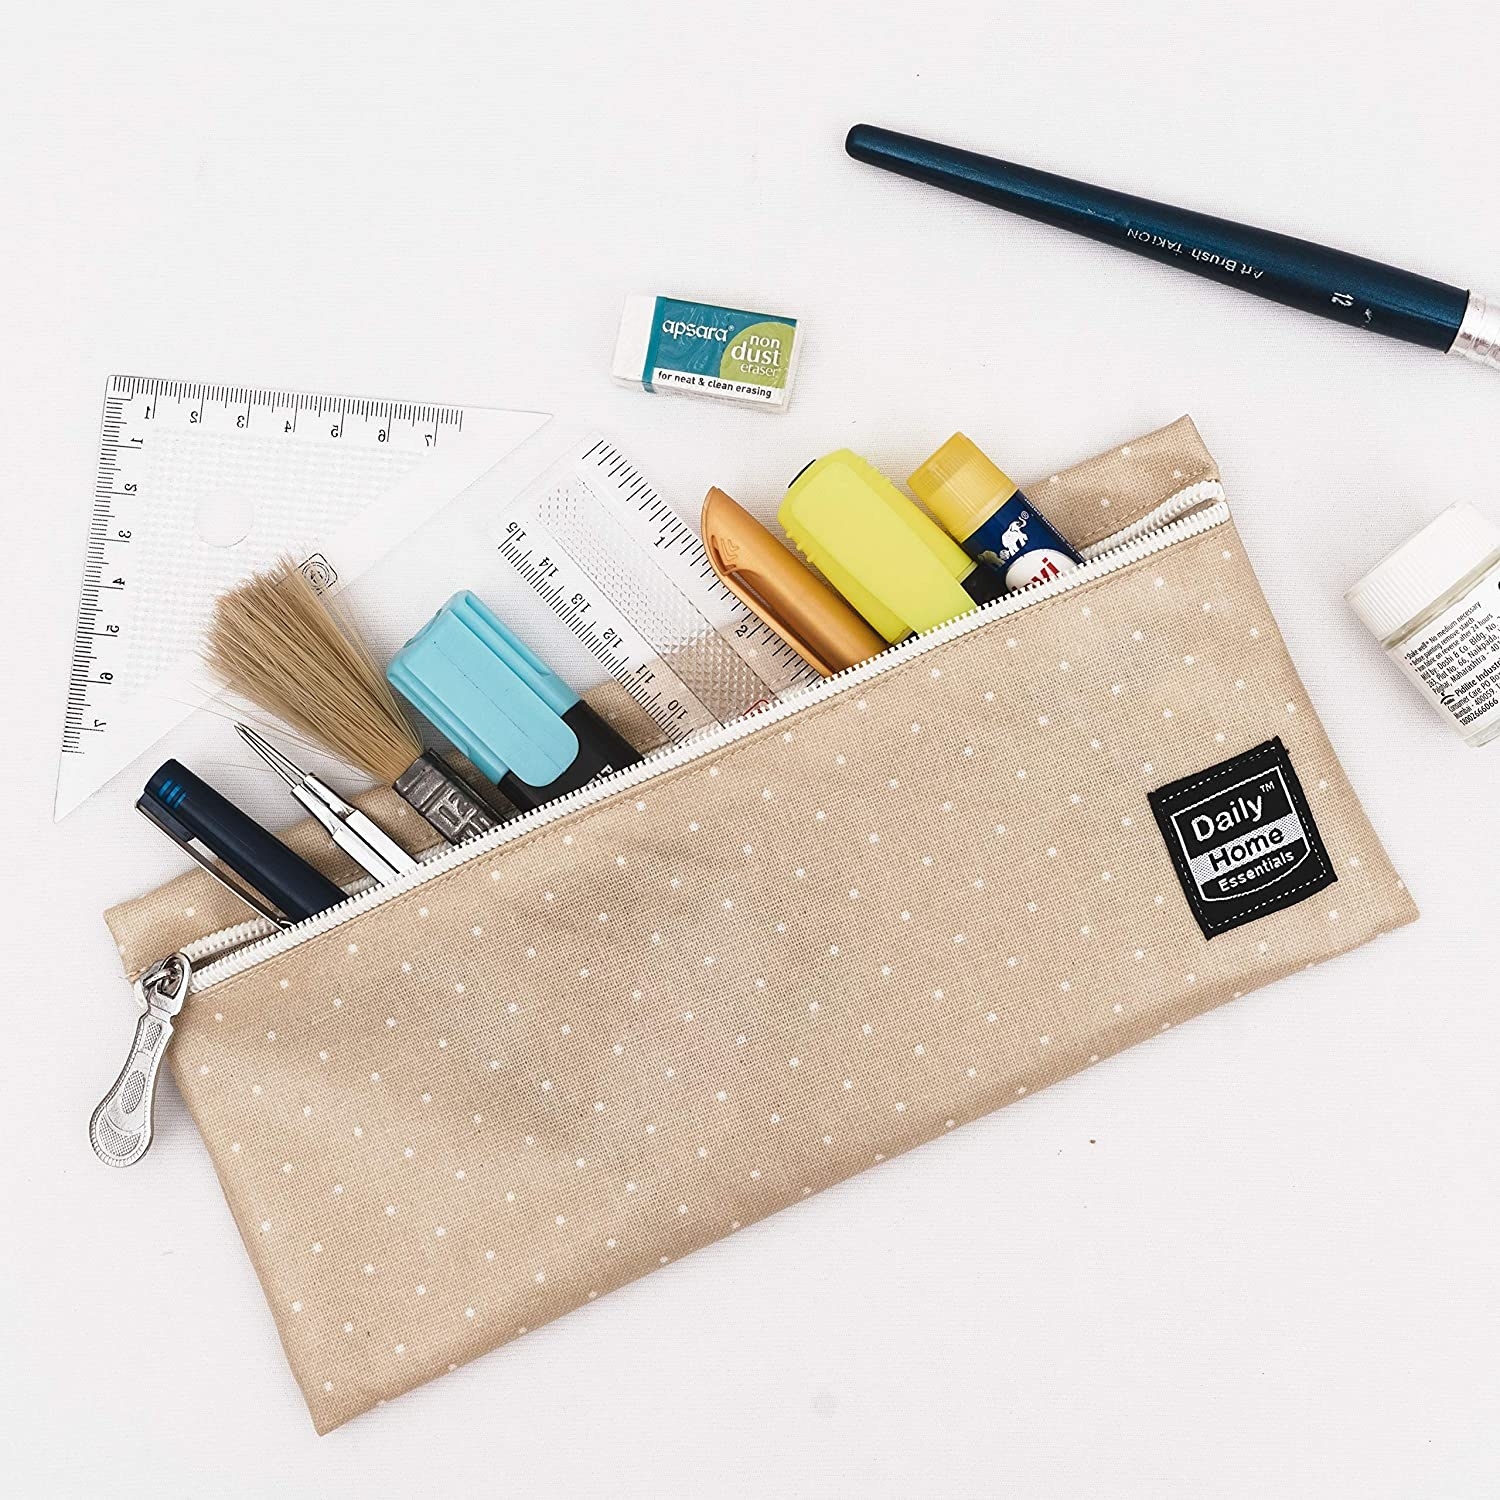 A beige pencil pouch with tiny white polka dots on it. It&#x27;s holding various stationery products like a ruler, pen, highlighter, glue stick, etc.